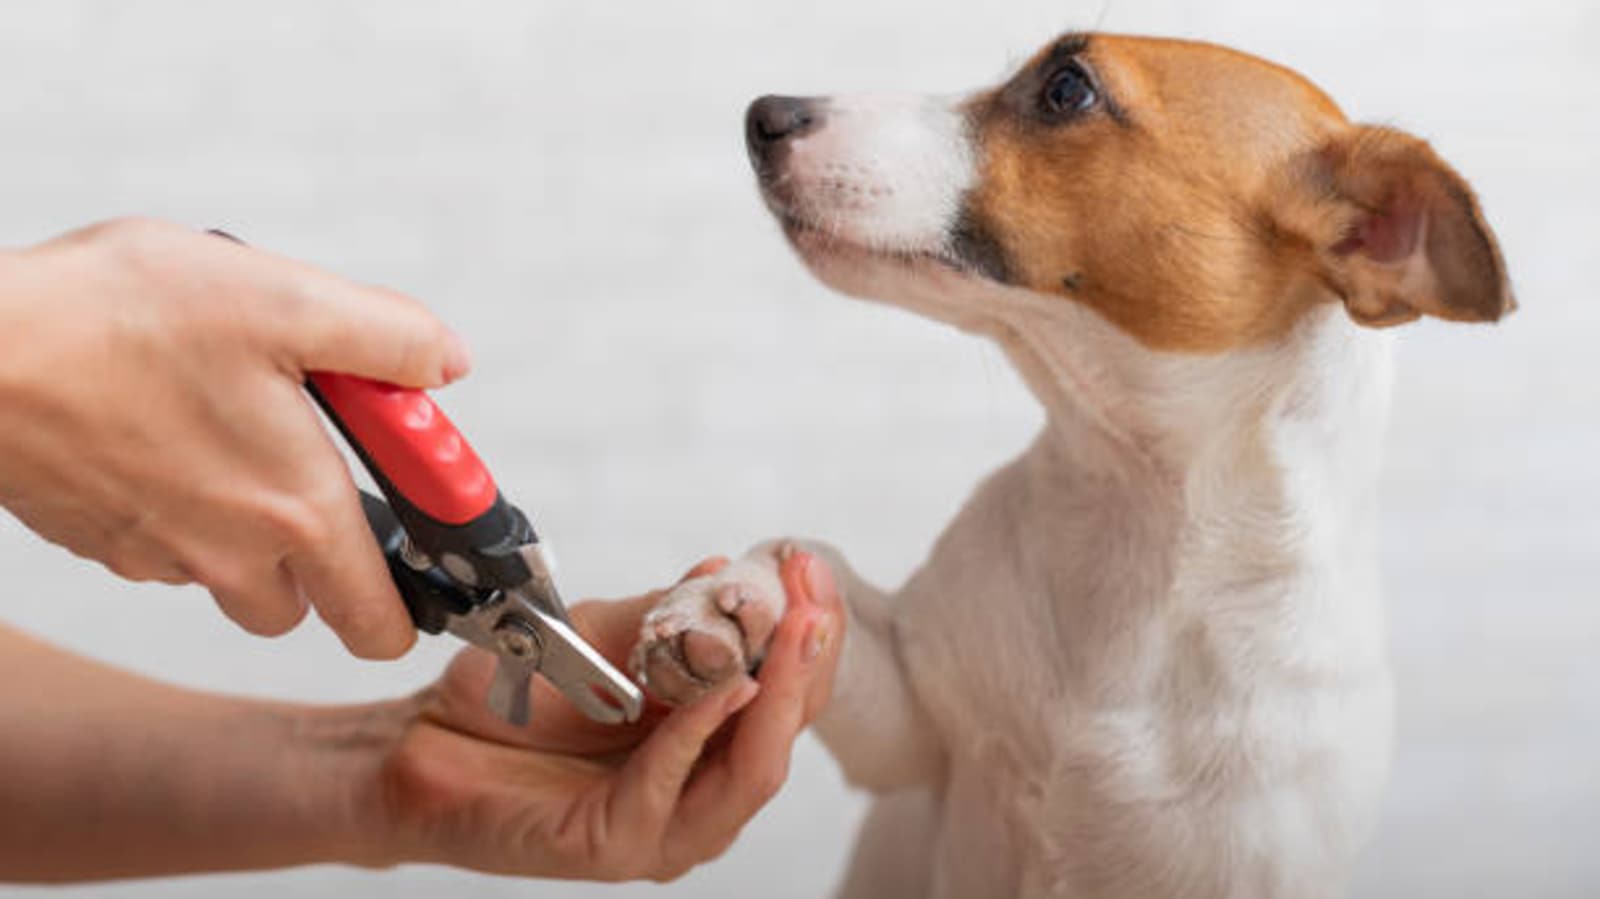 New tool for pet care: Trim nails the gentle way with the new Dremel -  Bosch Media Service